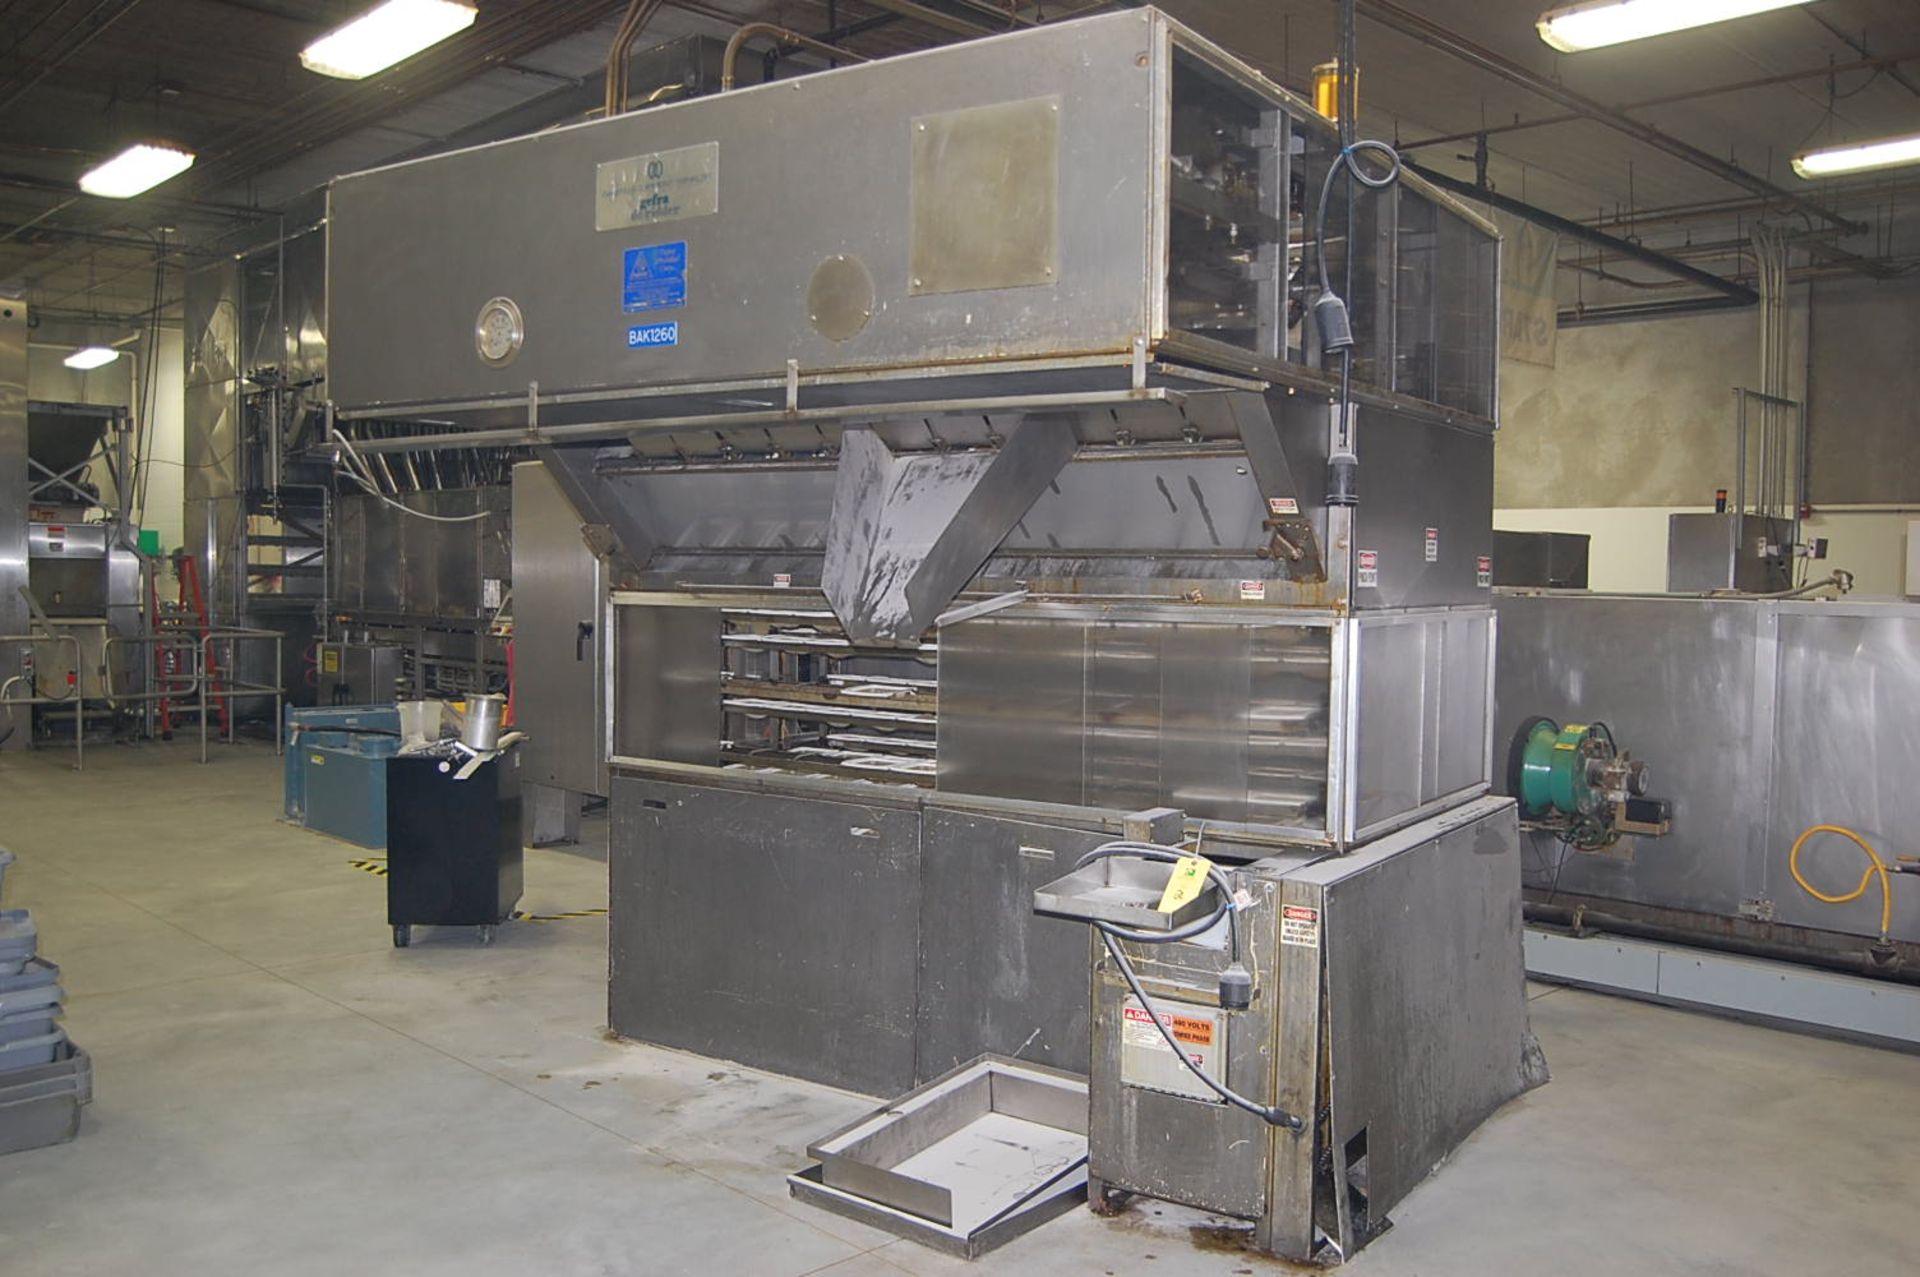 Bauers Equipment Topos Monidial Corp Proofer, Job #3454, 480 Volt, Additional Assorted Trays for